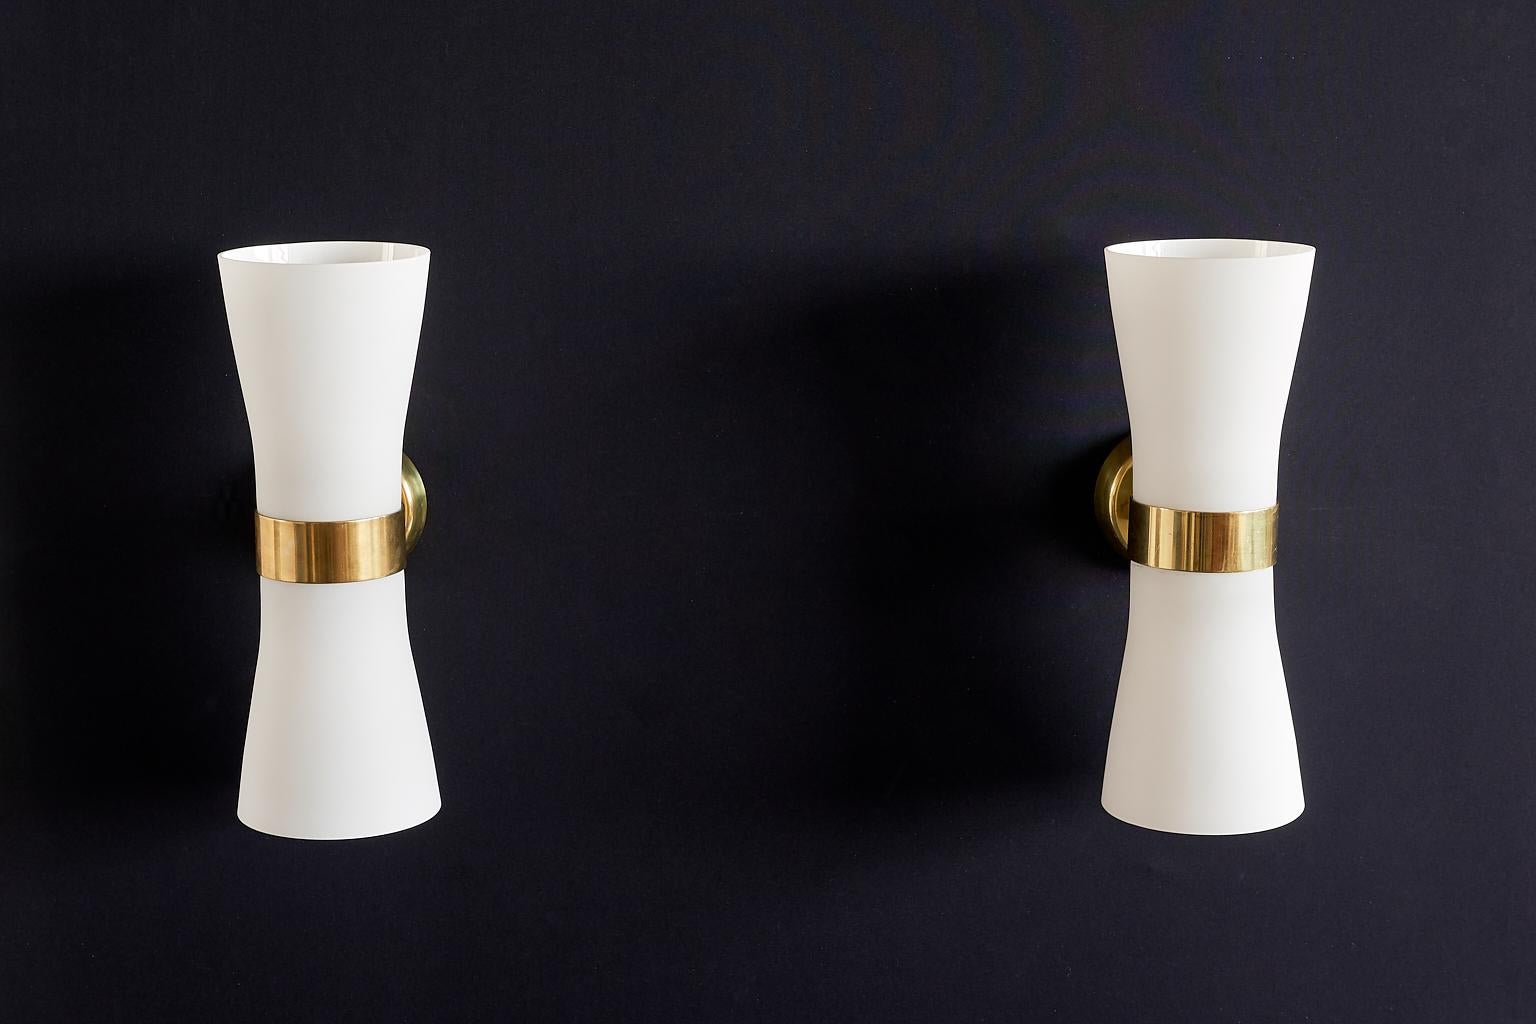 This rare pair of wall lights was designed by Paavo Tynell and produced by Idman in the early 1950s. They were designed for and used at the Governments Railway Station in Helsinki. The generously sized opaline glass shades are mounted on a brass